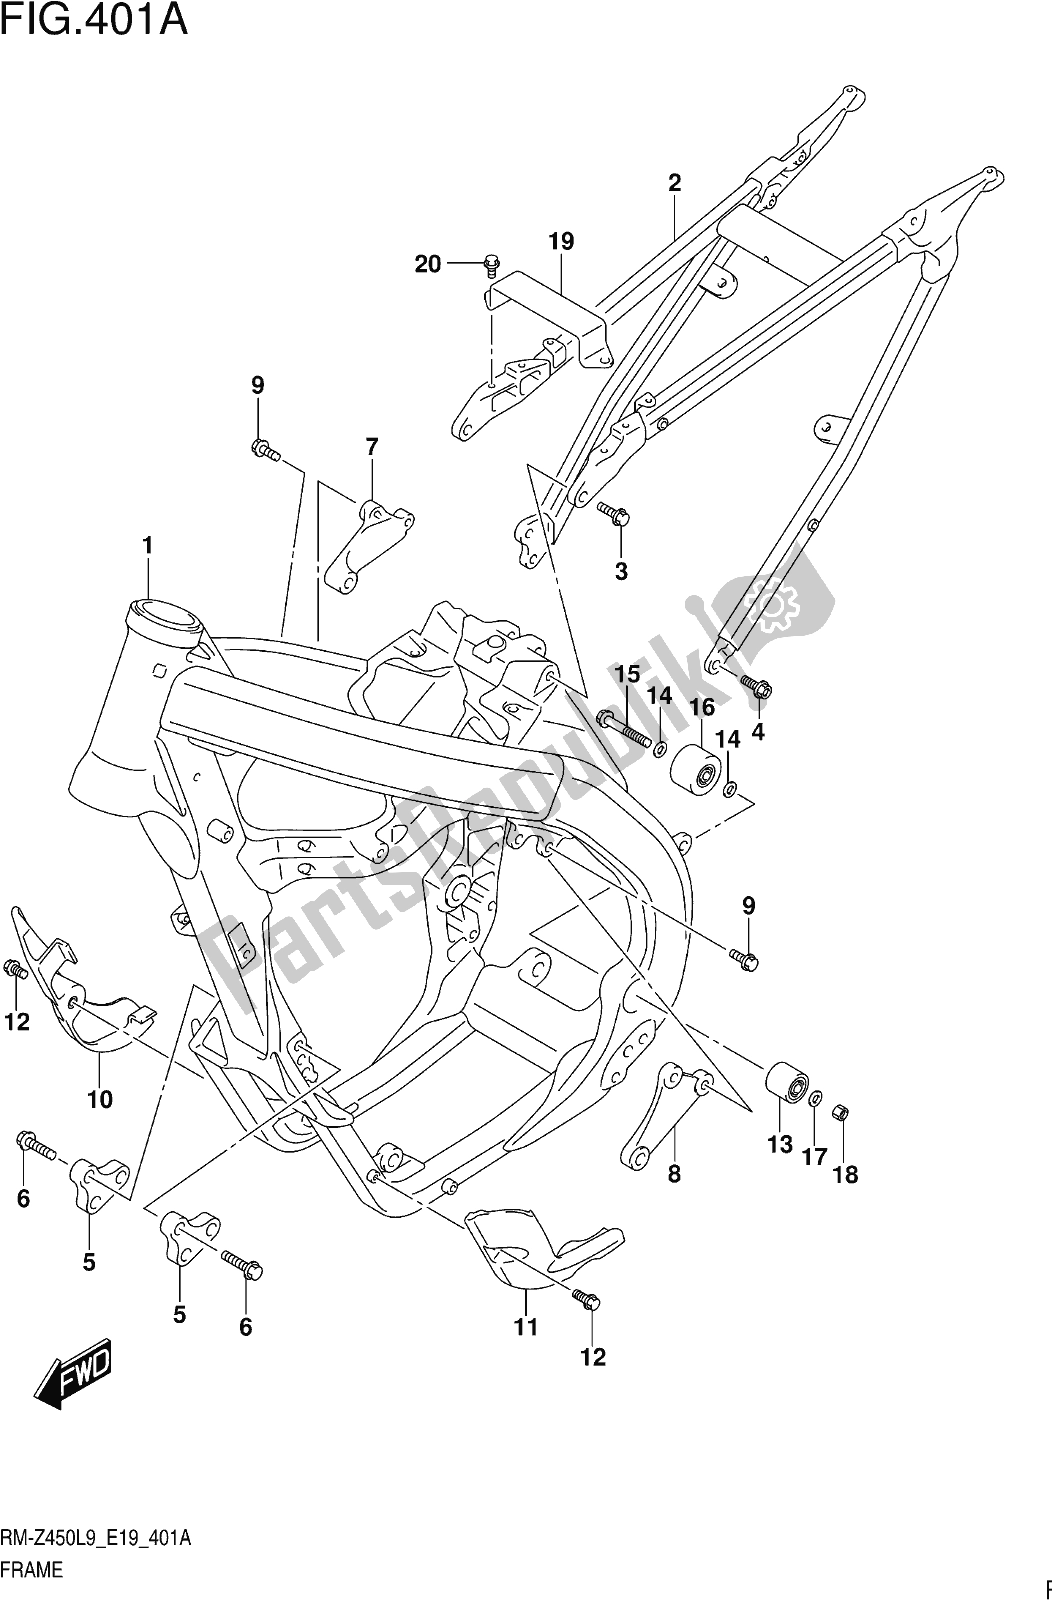 All parts for the Fig. 401a Frame of the Suzuki RM-Z 450 2019